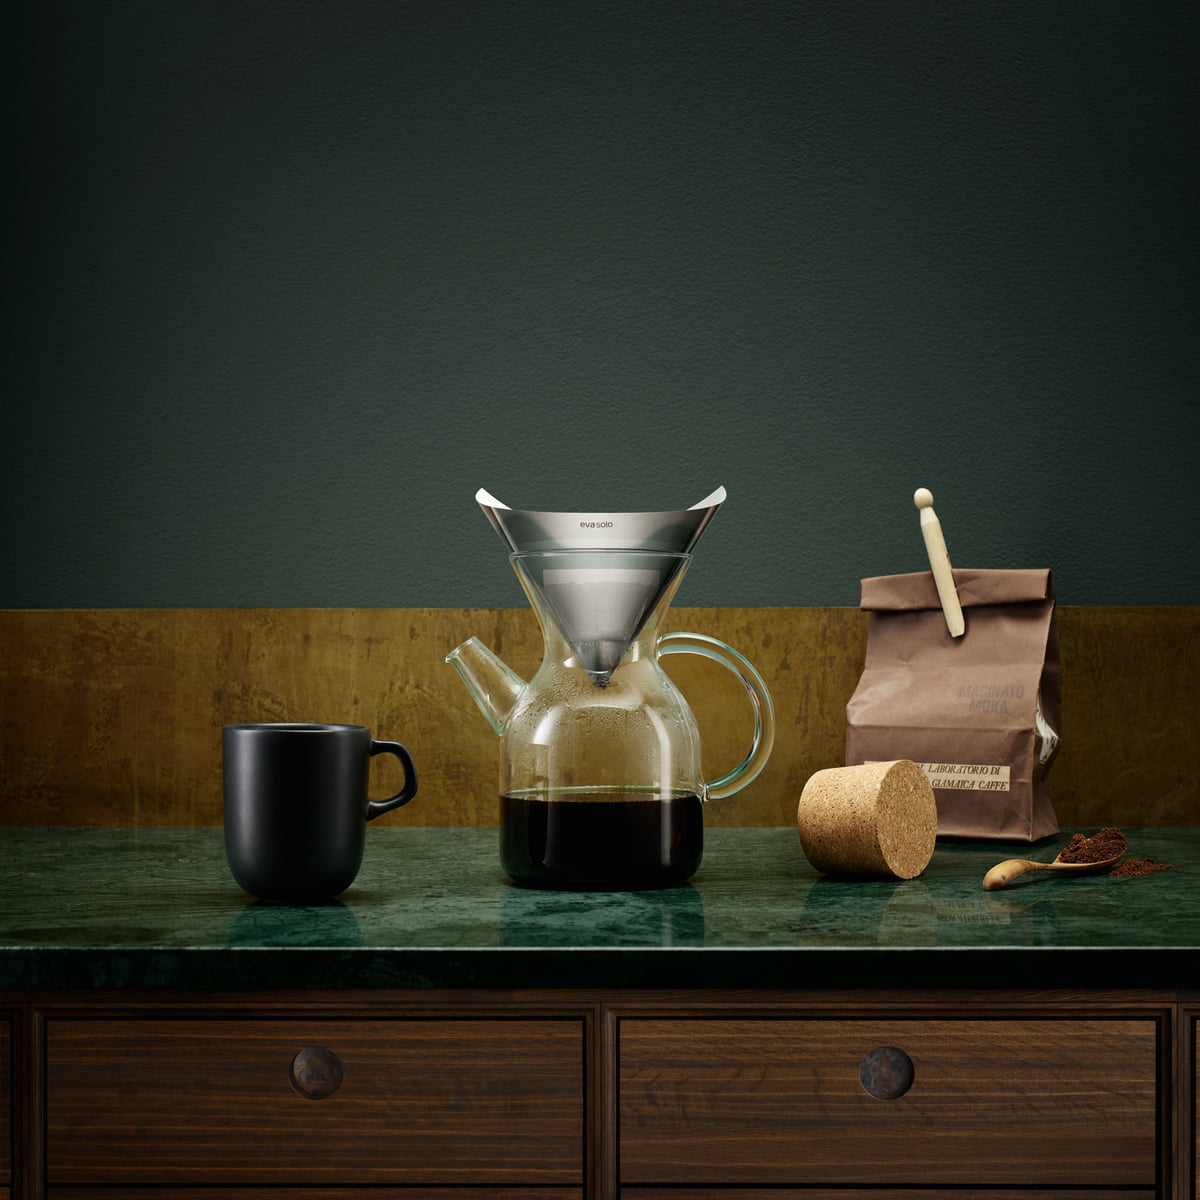 Buy the Pour-Over Coffee-Maker by Eva solo